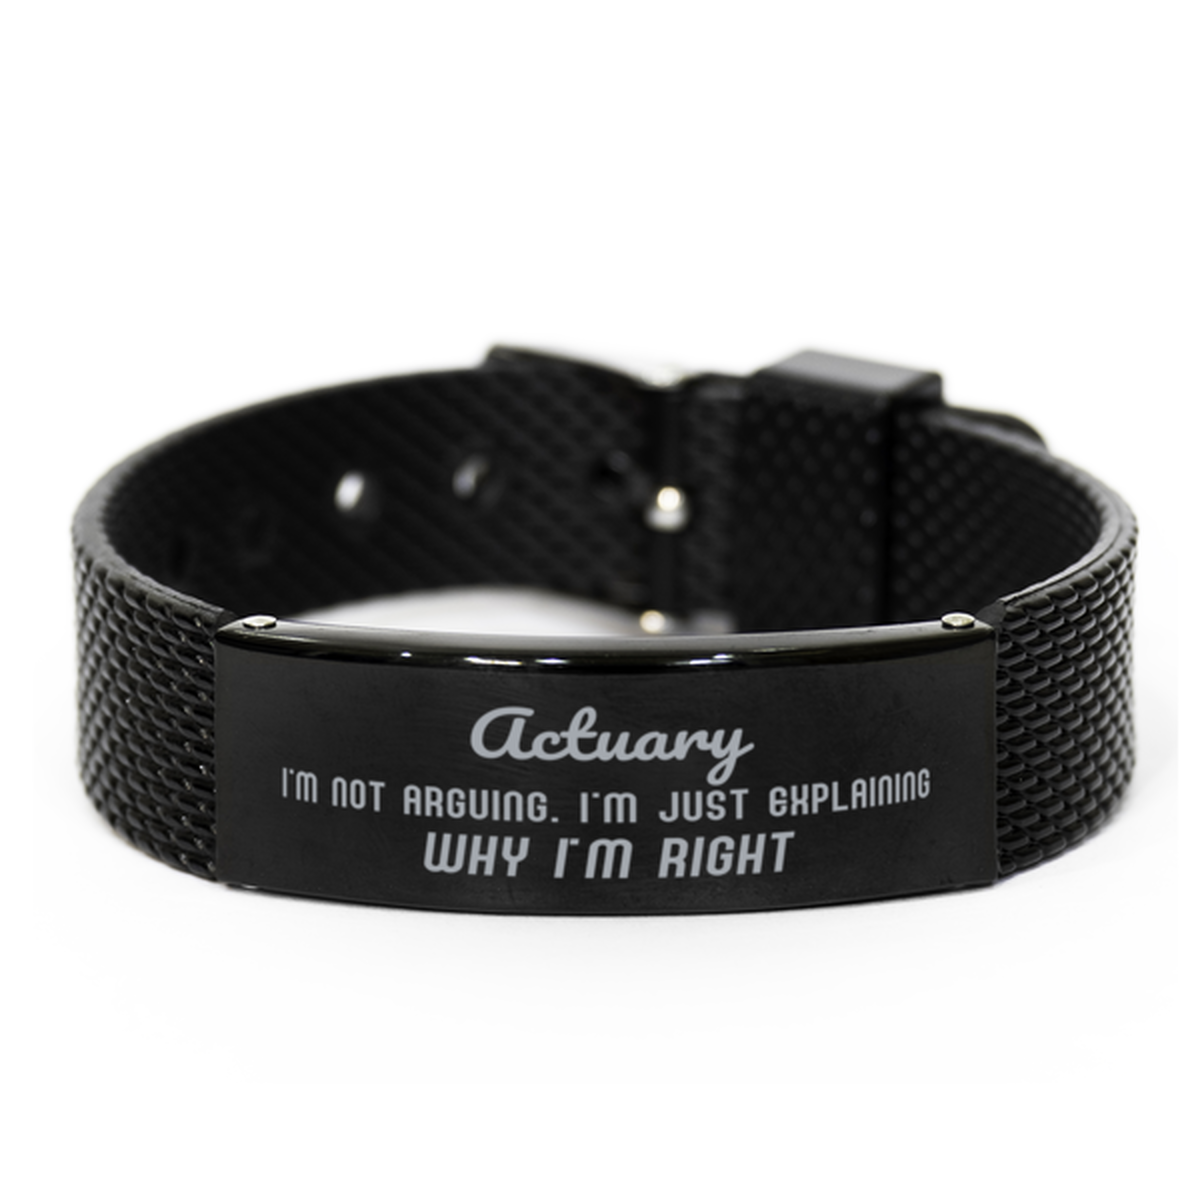 Actuary I'm not Arguing. I'm Just Explaining Why I'm RIGHT Black Shark Mesh Bracelet, Funny Saying Quote Actuary Gifts For Actuary Graduation Birthday Christmas Gifts for Men Women Coworker